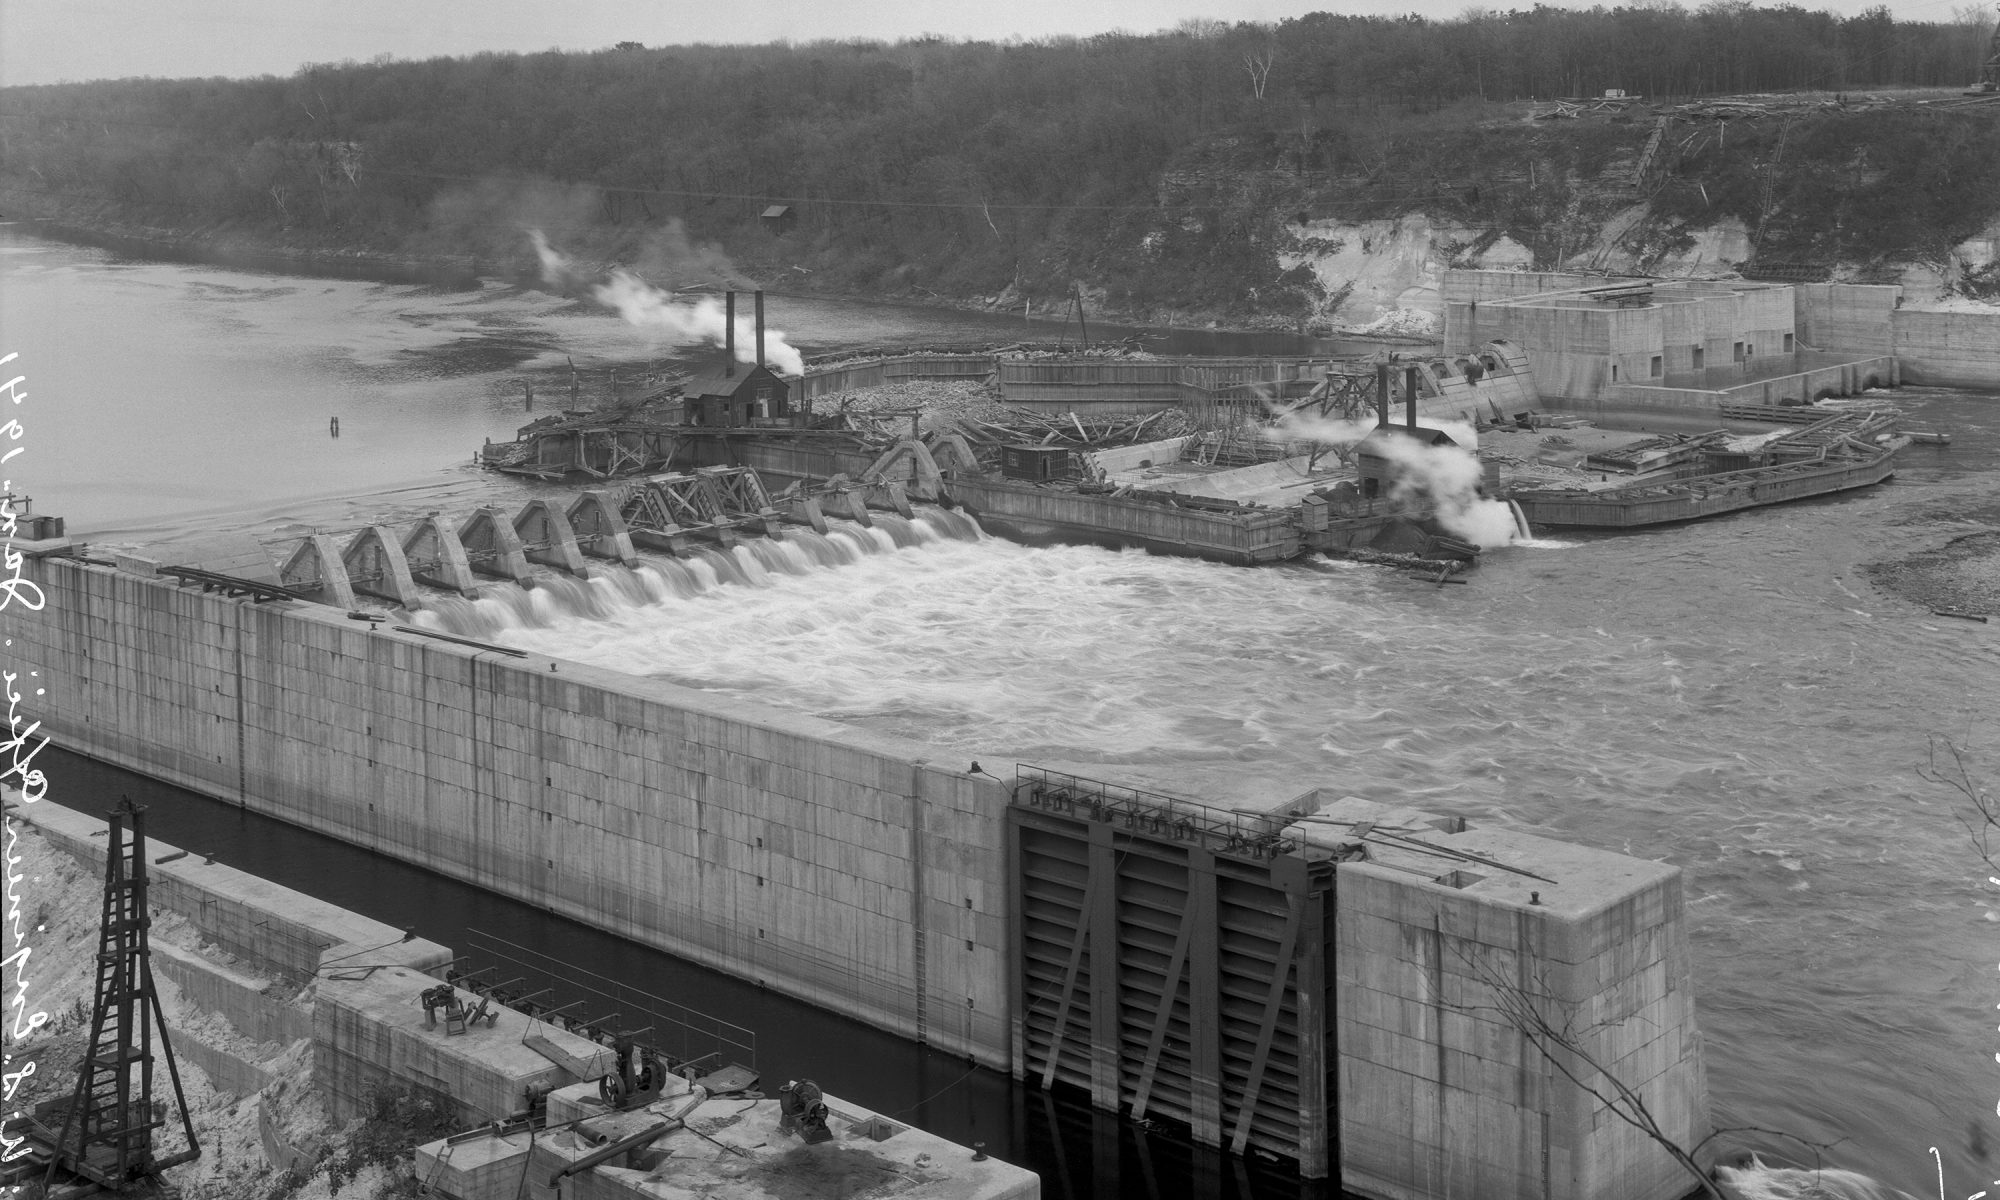 This 1916 photo, taken from the west side of the river, shows Lock & Dam No. 1 under construction. At the upper right are the original foundations built by the Army Corps of Engineers for a future hydroelectric plant. Those foundations would later be demolished to make way for Henry Ford’s larger turbine generators. Courtesy Minnesota Historical Society